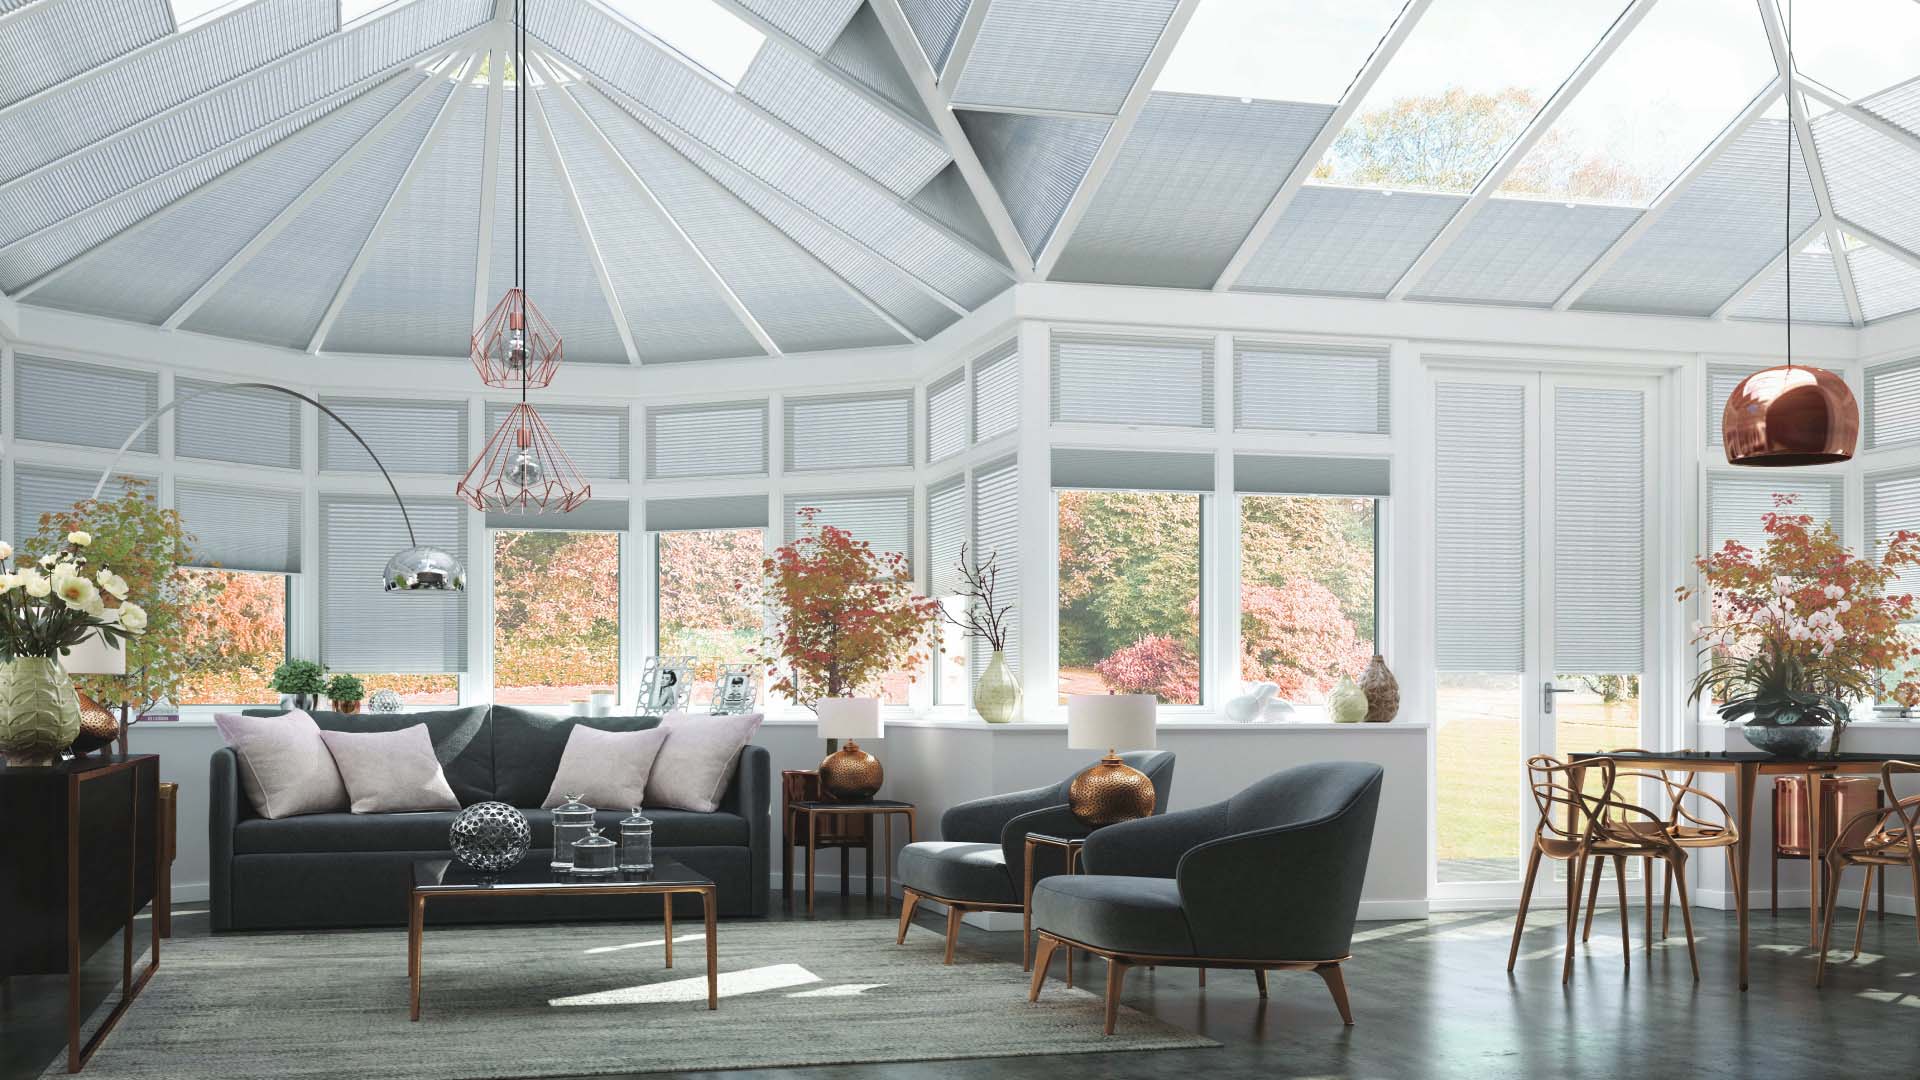 A spacious conservatory